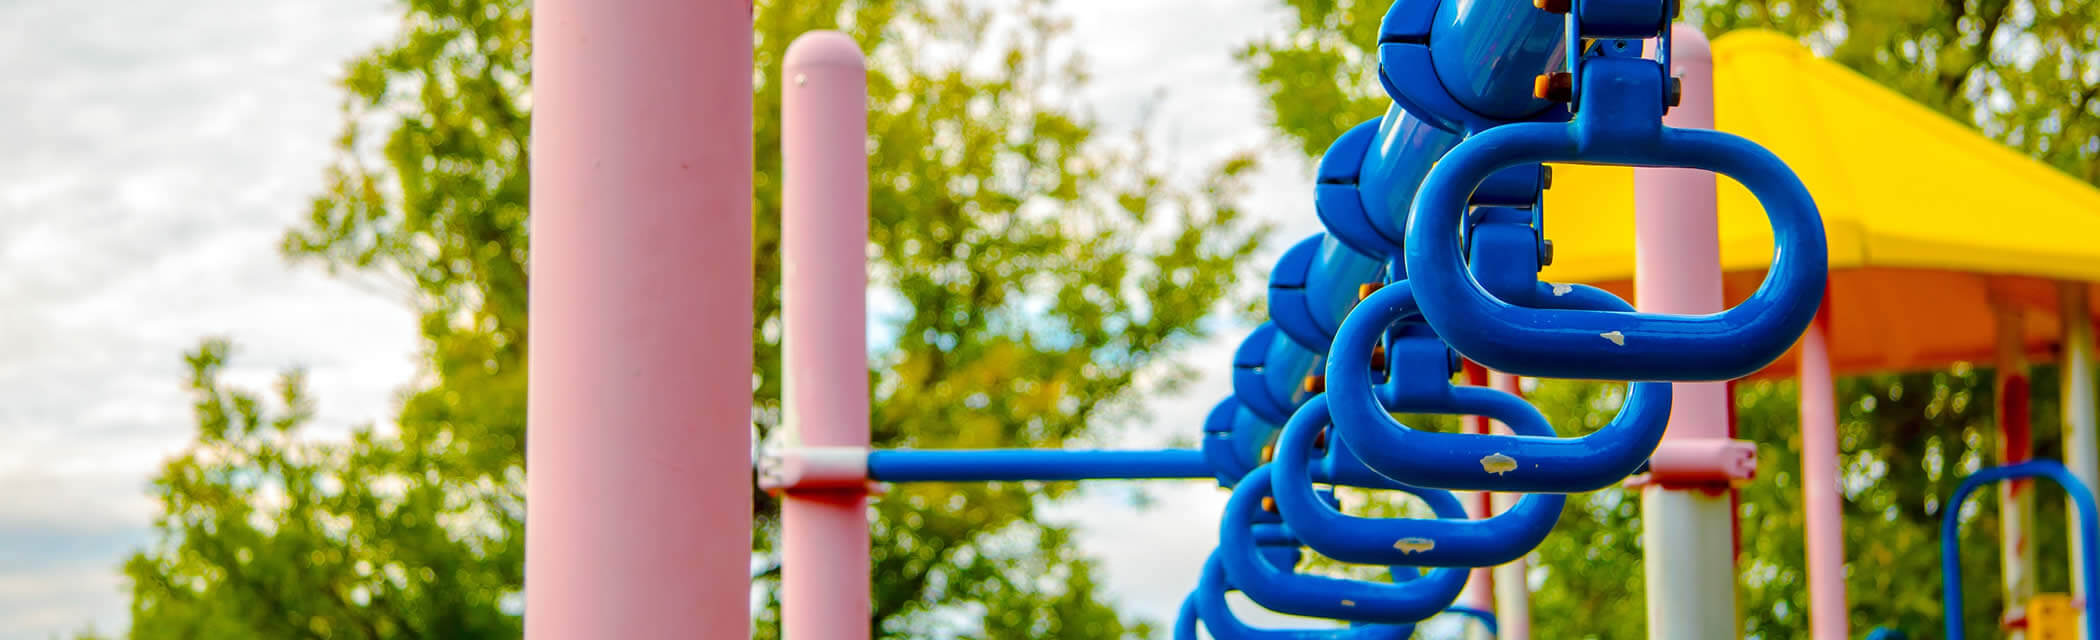 Professional Playground Cleaning in Wake Forest & Raleigh NC